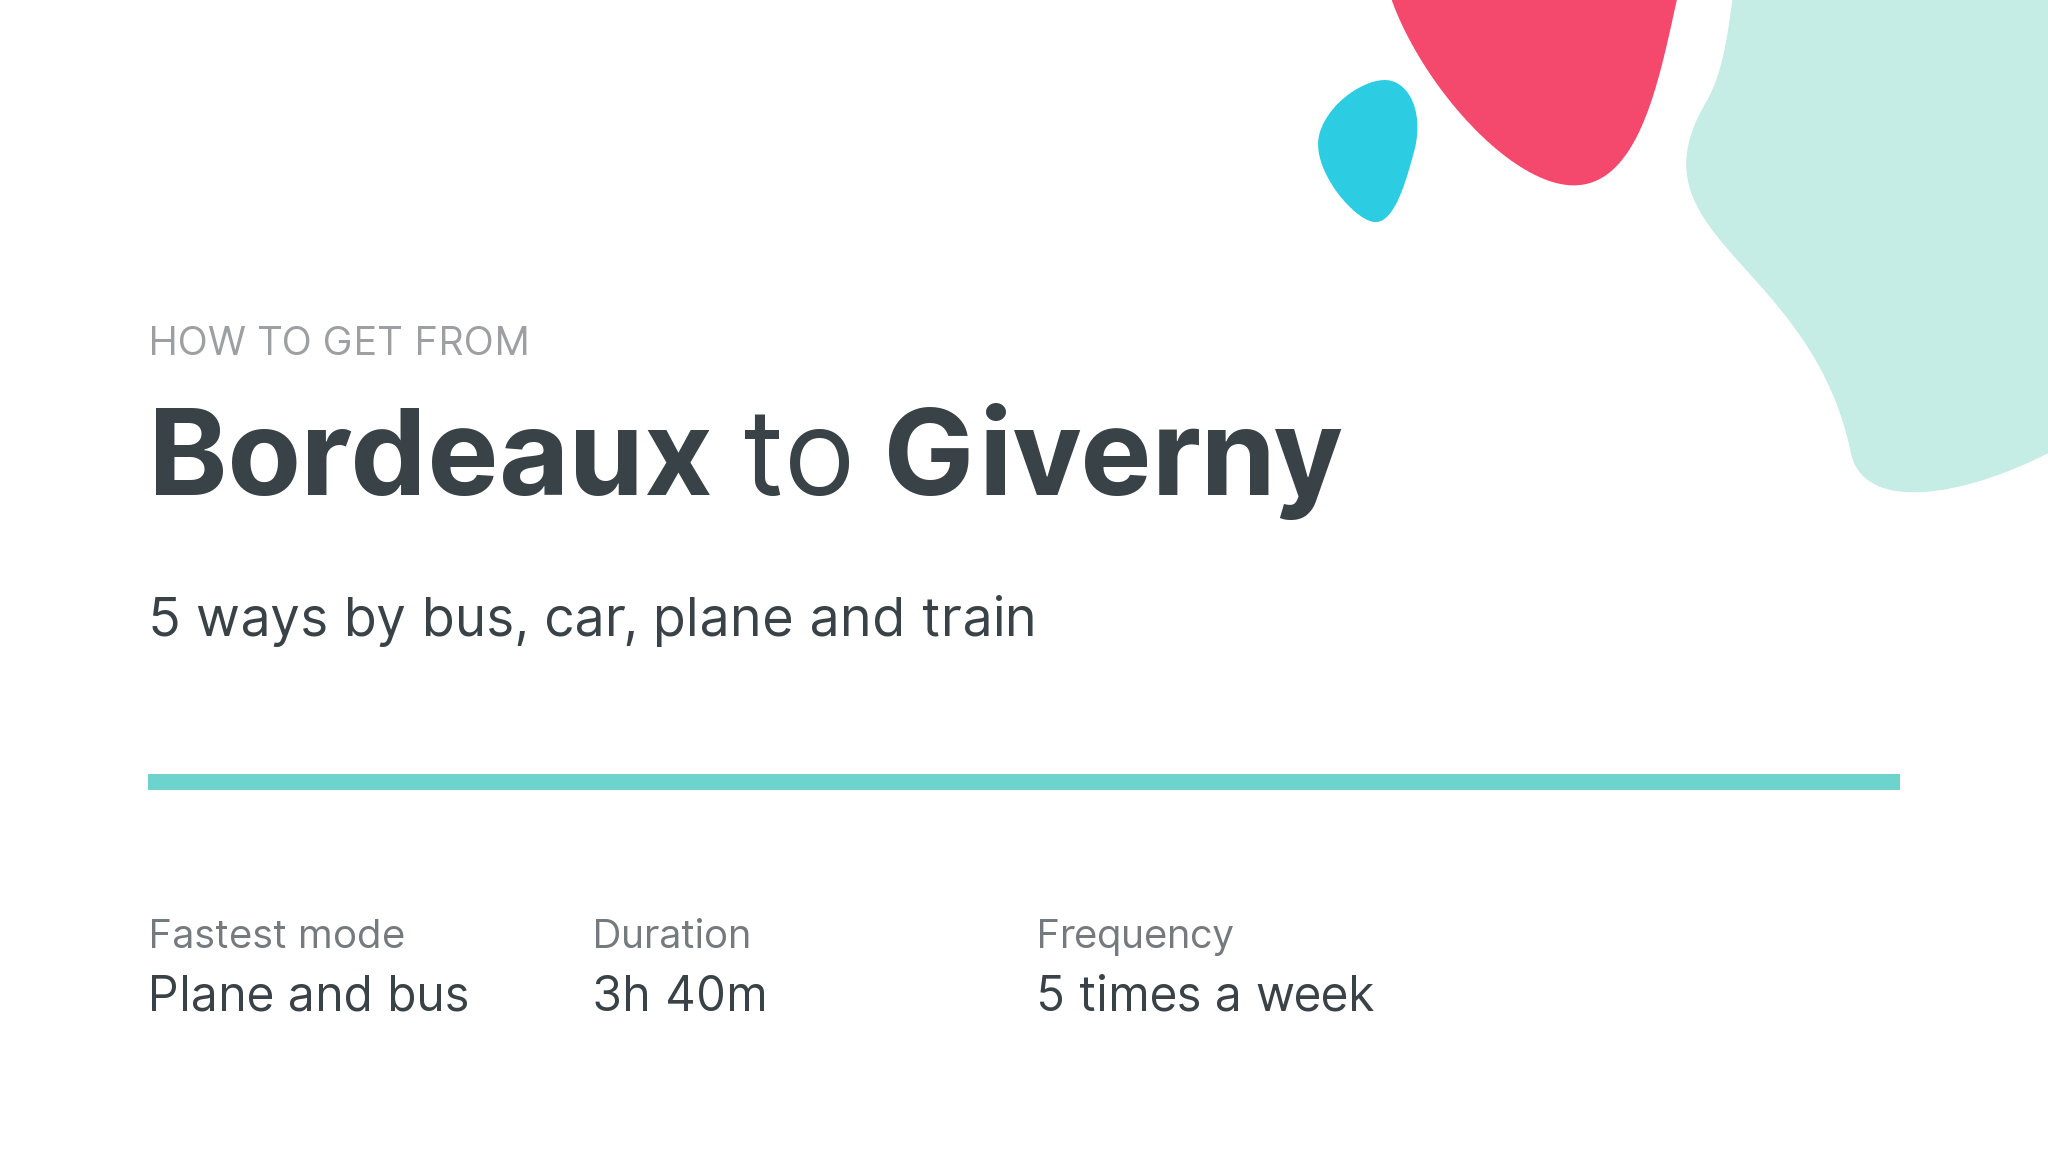 How do I get from Bordeaux to Giverny